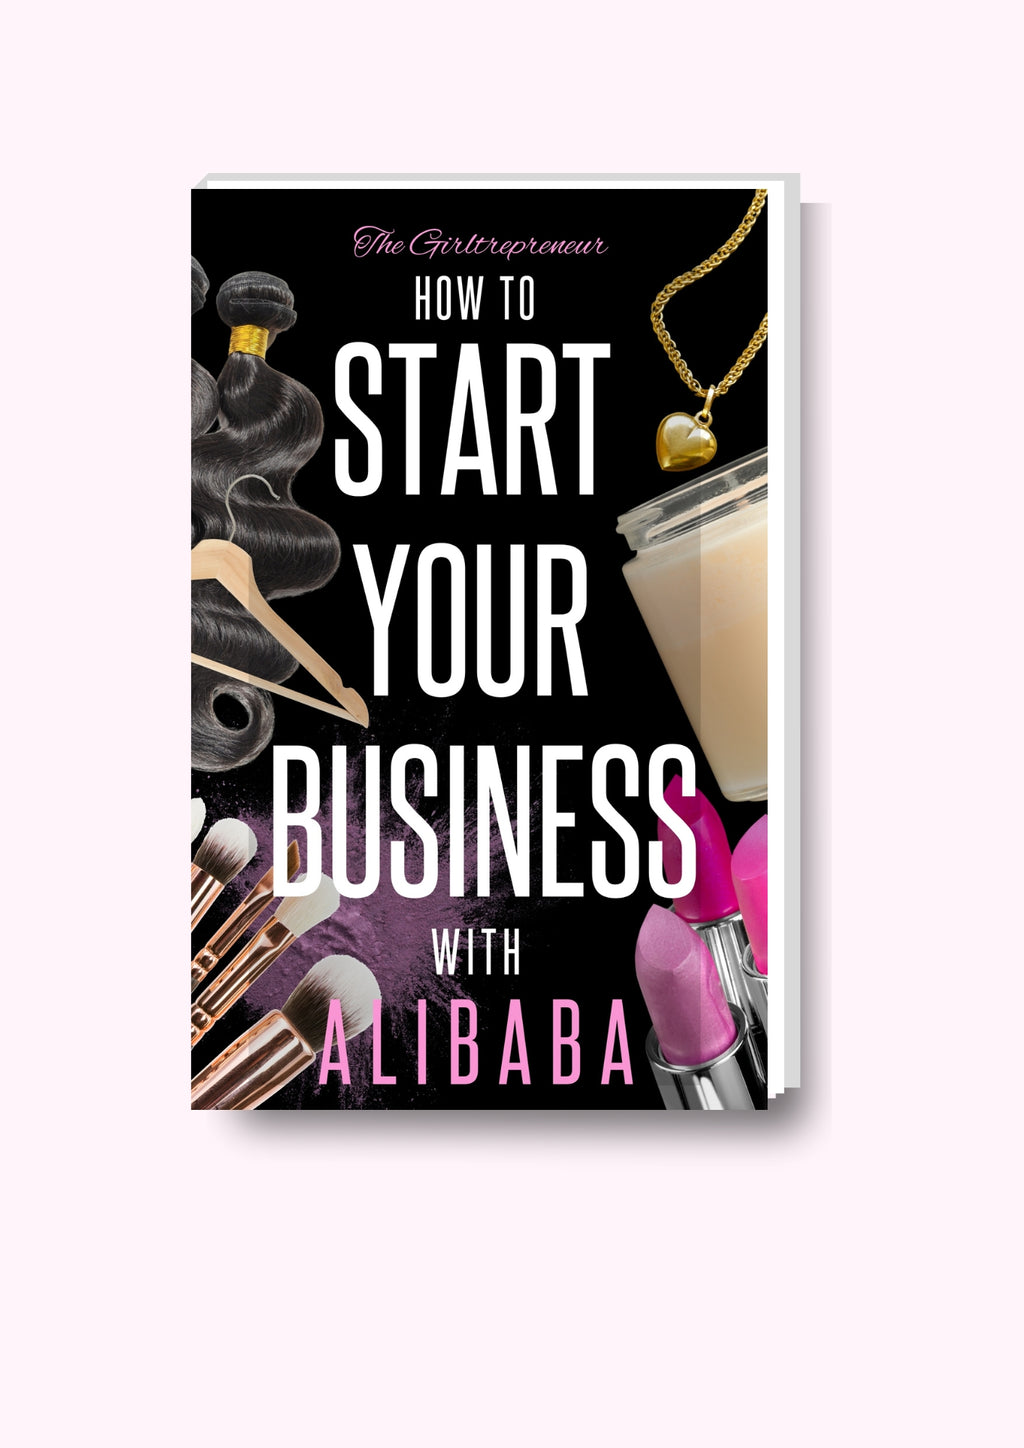 "How to Start your business with Alibaba" E-book - JAZZYBELLE Swim